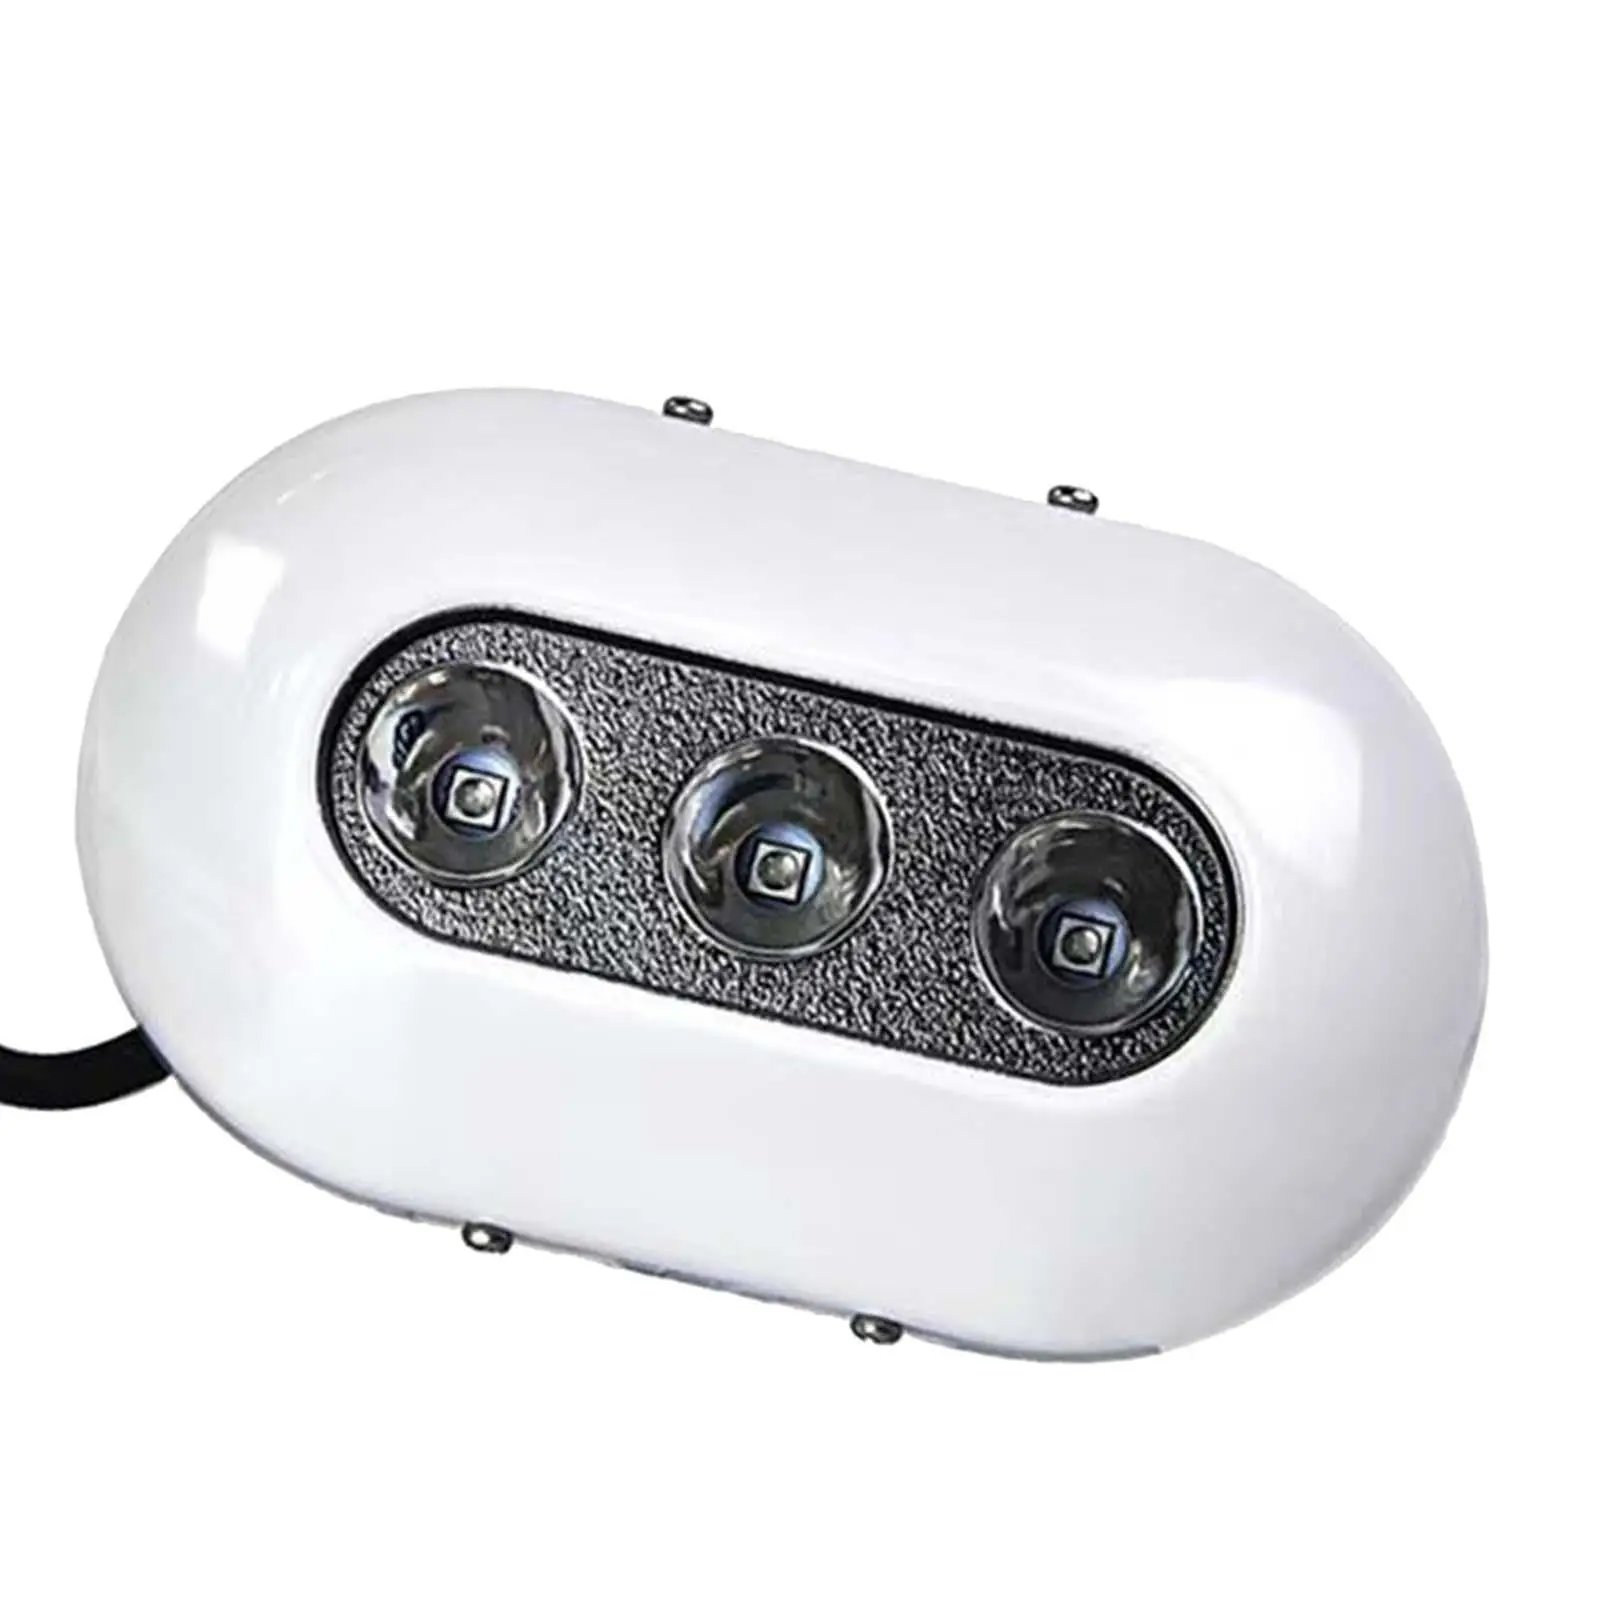 LED Underwater Boat Light High Brightness IP68 Waterproof Surface Mount for